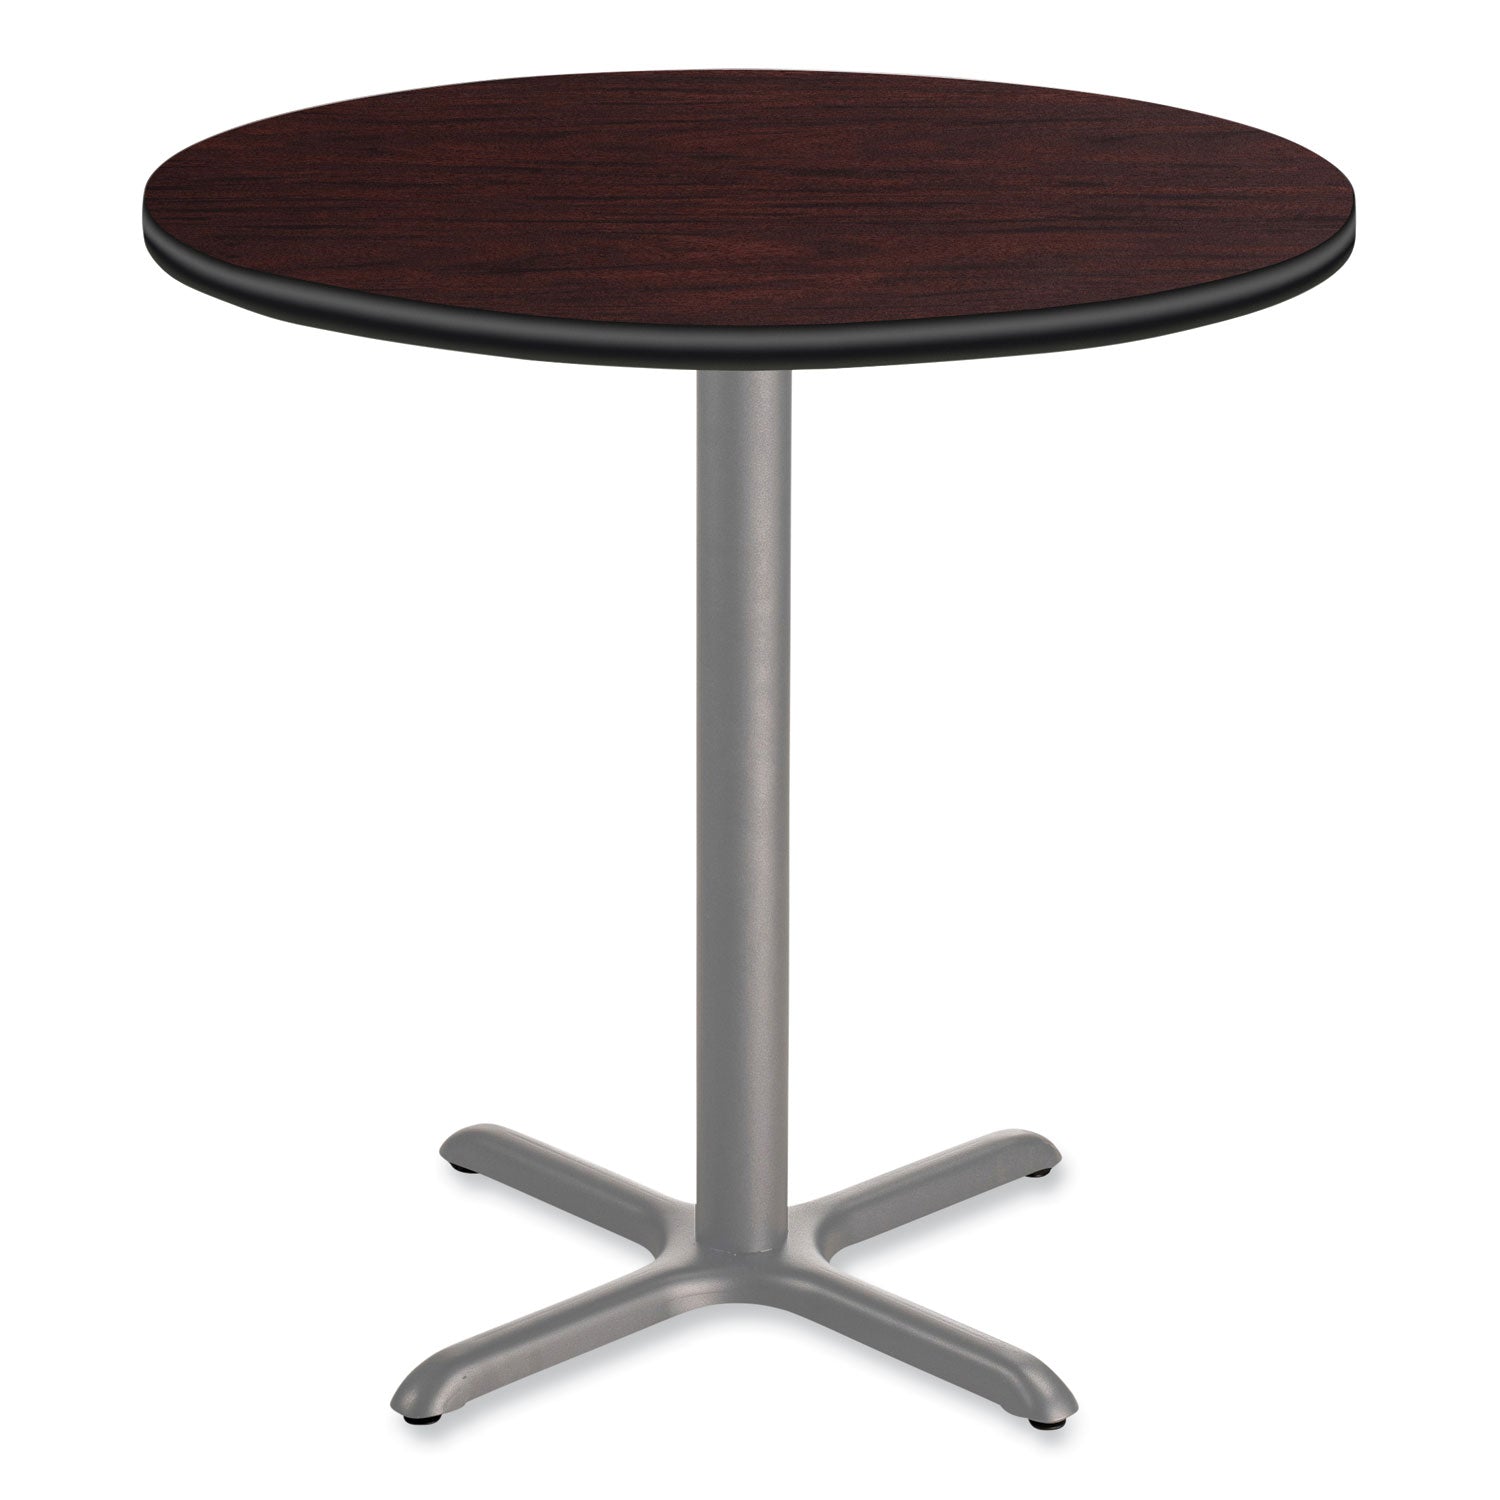 cafe-table-36-diameter-x-42h-round-top-x-base-mahogany-top-gray-base-ships-in-7-10-business-days_npscg13636xb1my - 1